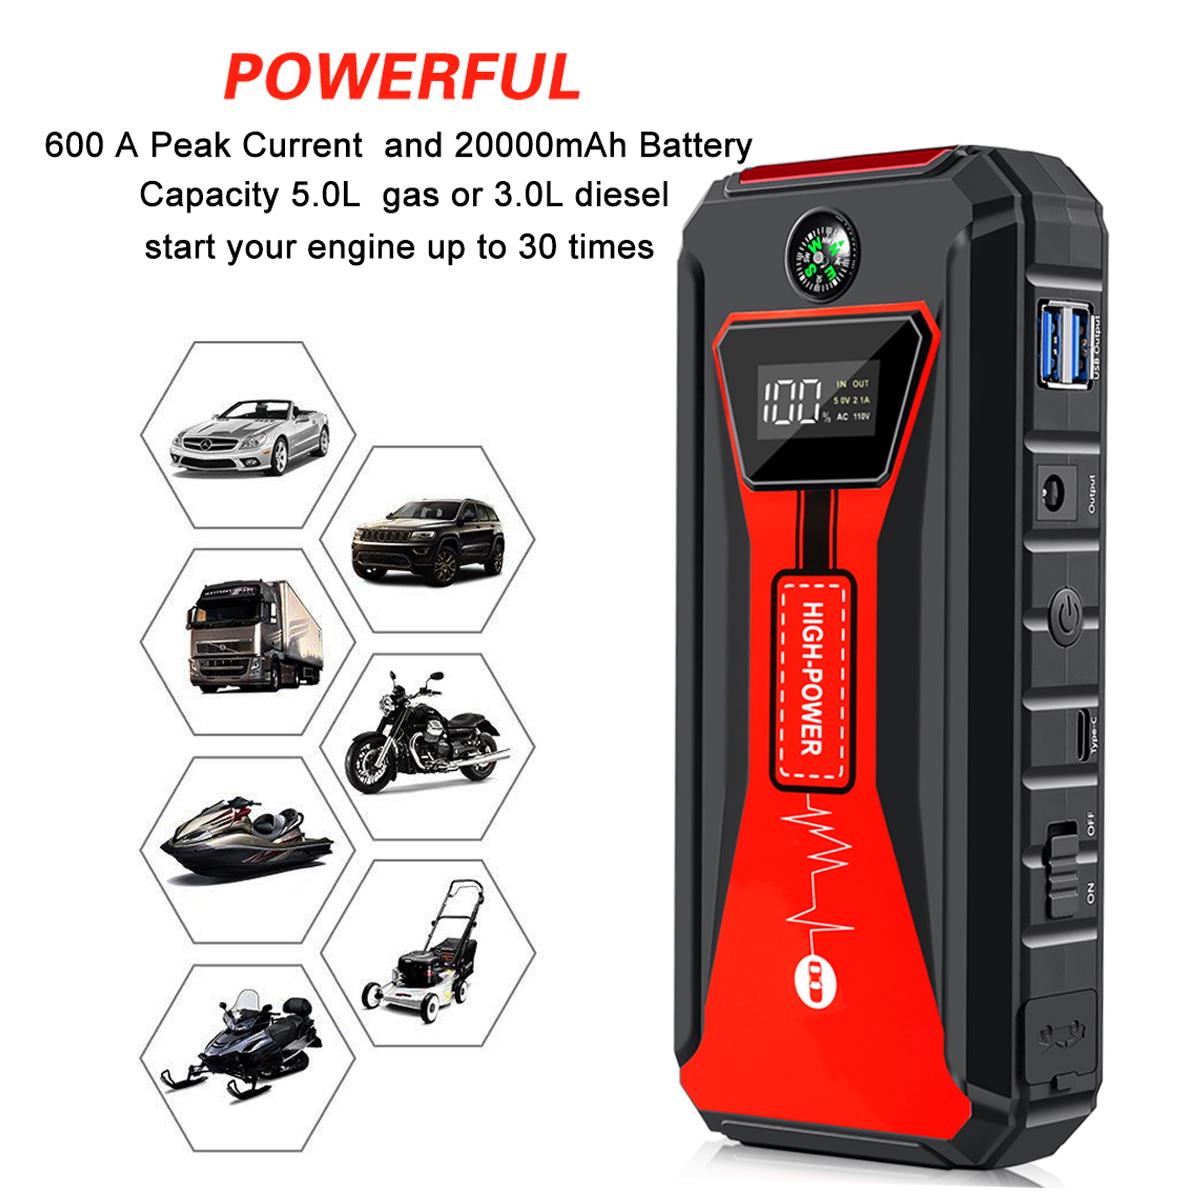 BIUBLE 12V 12000Mah Car Jump Starter LED Battery Charger Booster Emergency Power Bank For Outdoor Car Stalled Suddenly